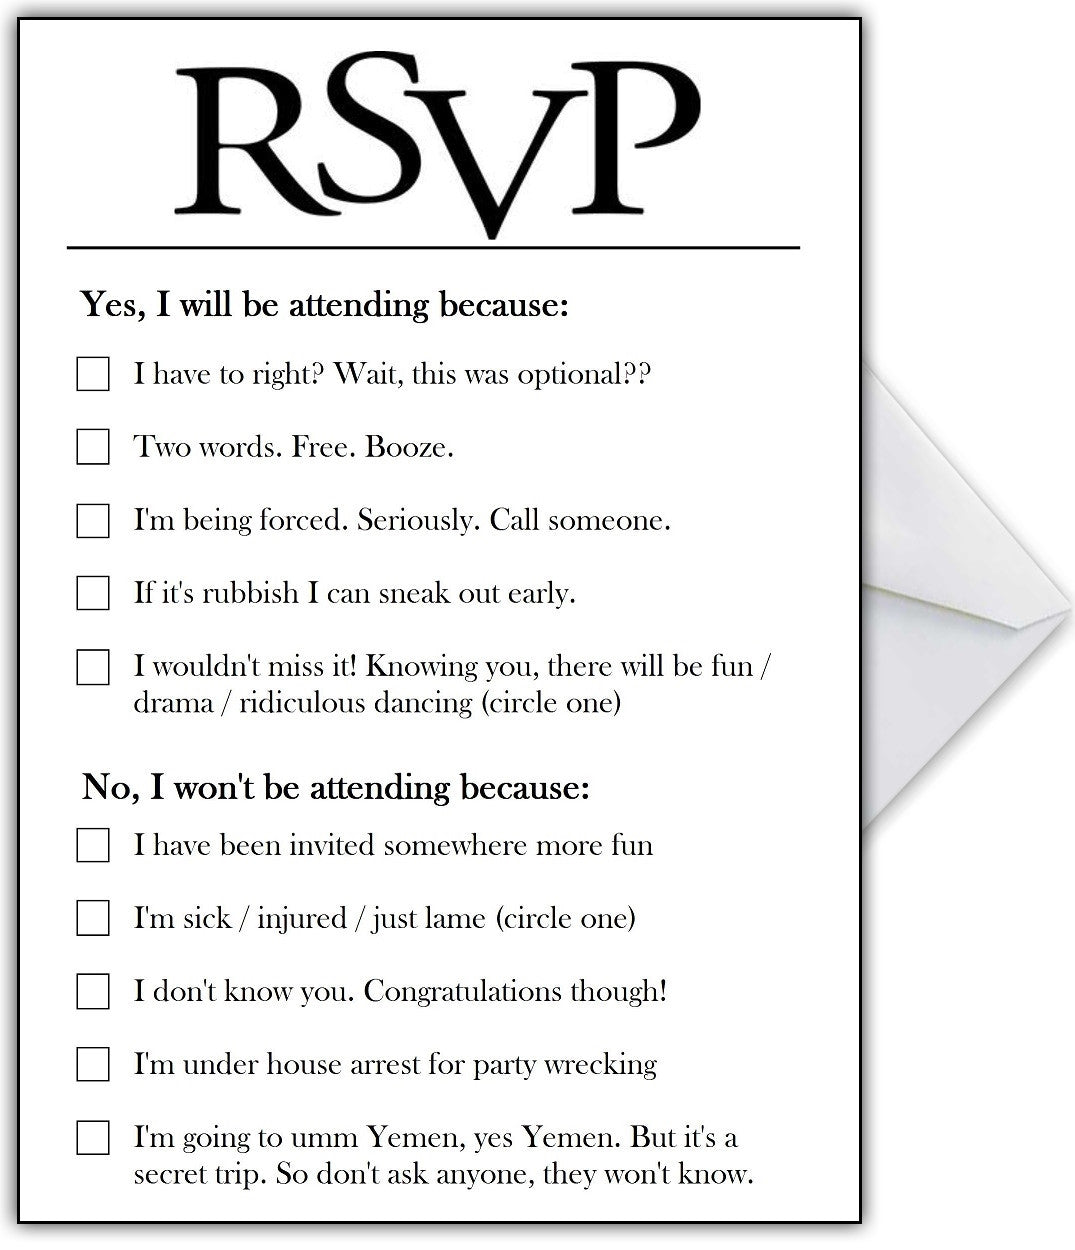 How to rsvp to a party